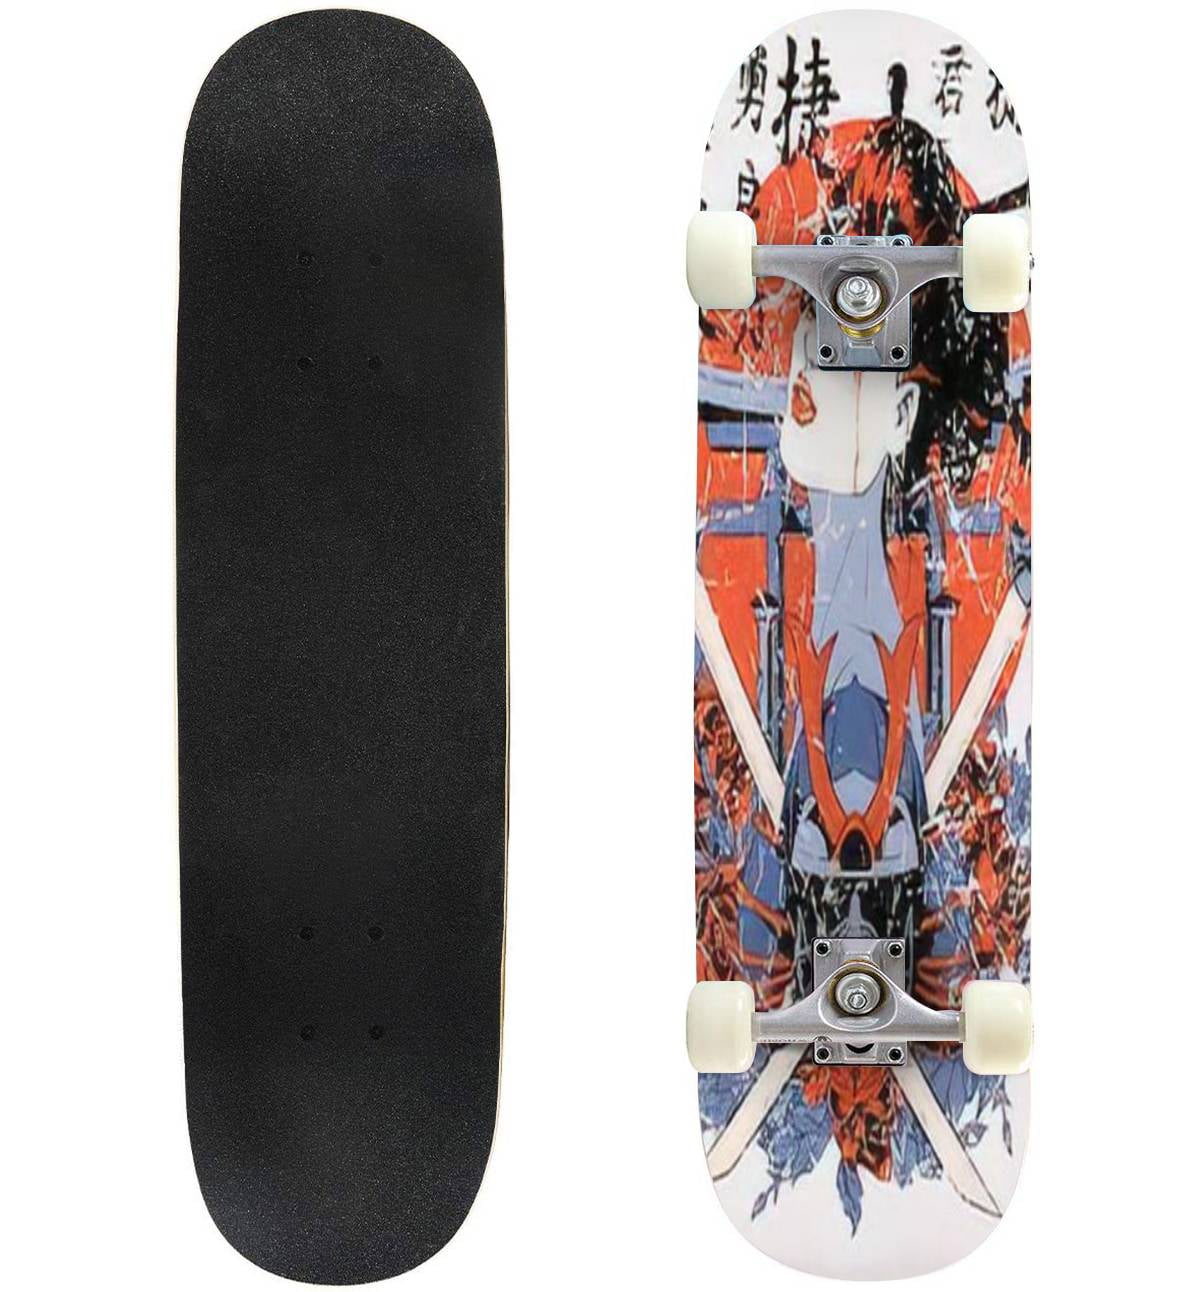 Geisha Also available separate the original without Outdoor Skateboard 31"x8" Pro Complete Skate Board Cruiser - Walmart.com